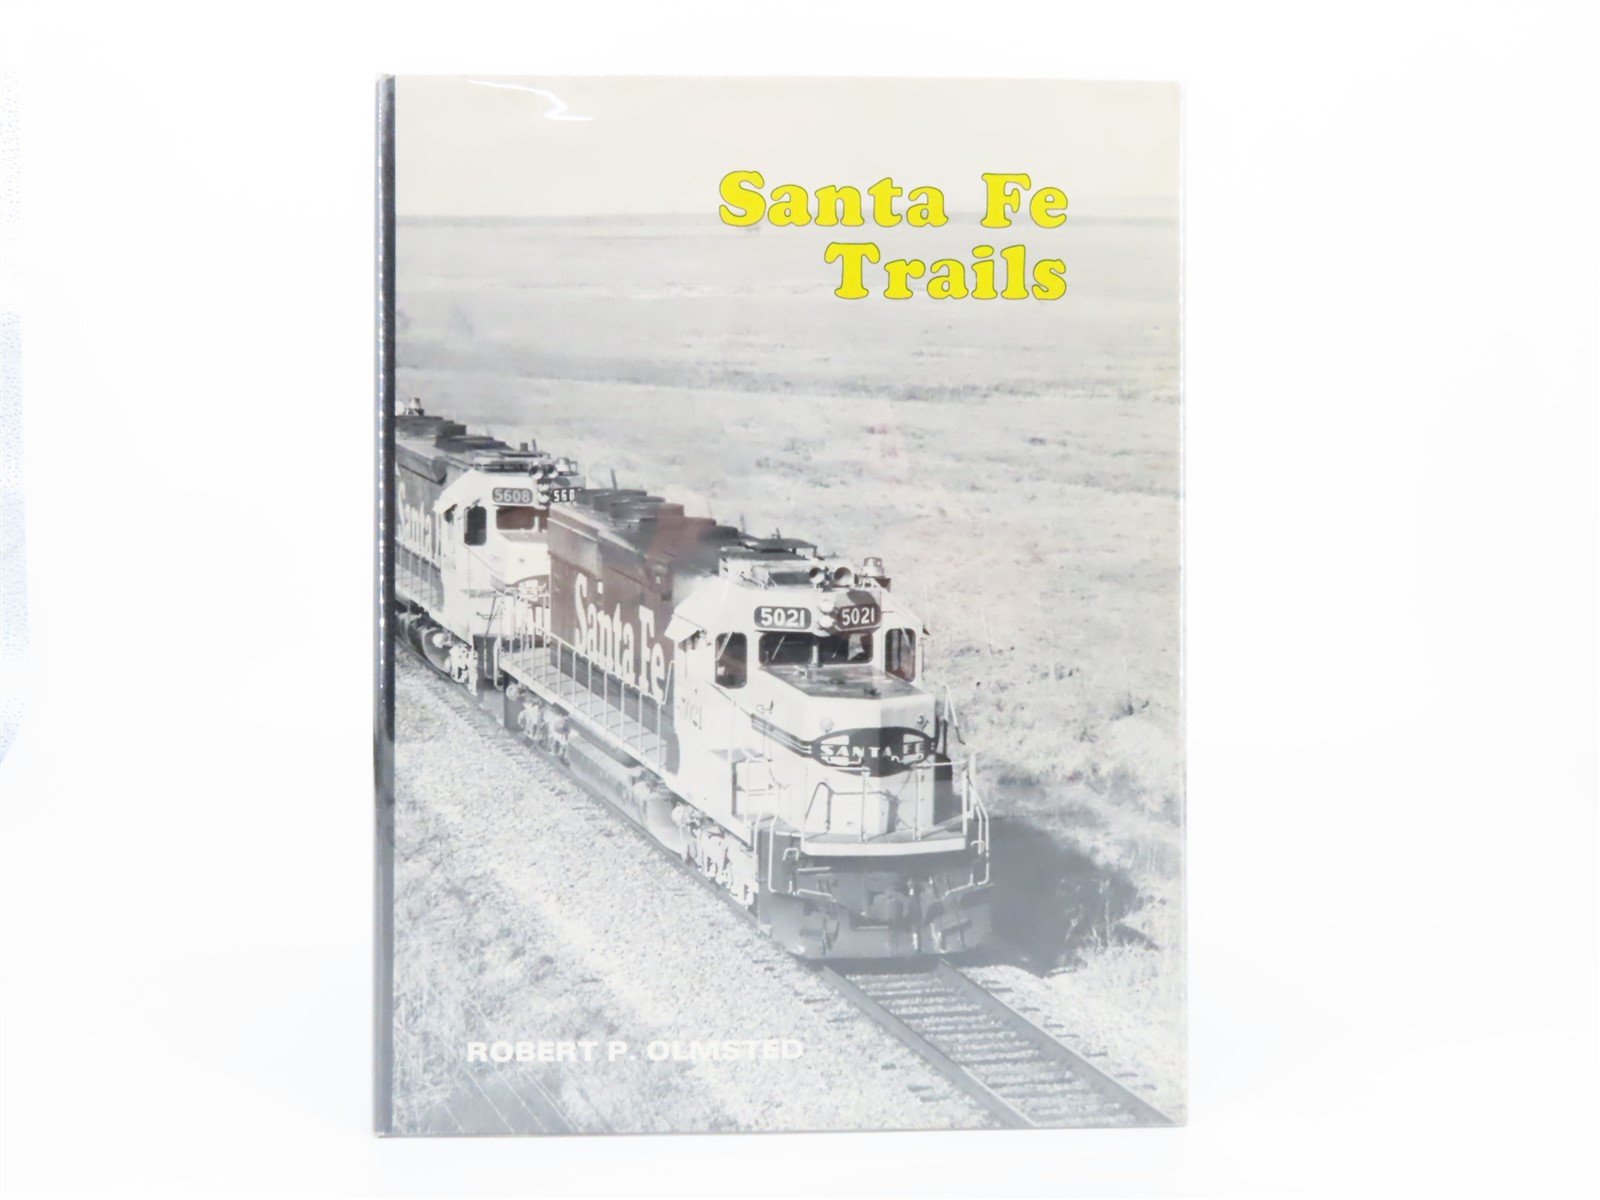 Santa Fe Trails by Robert P. Olmsted ©1987 HC Book